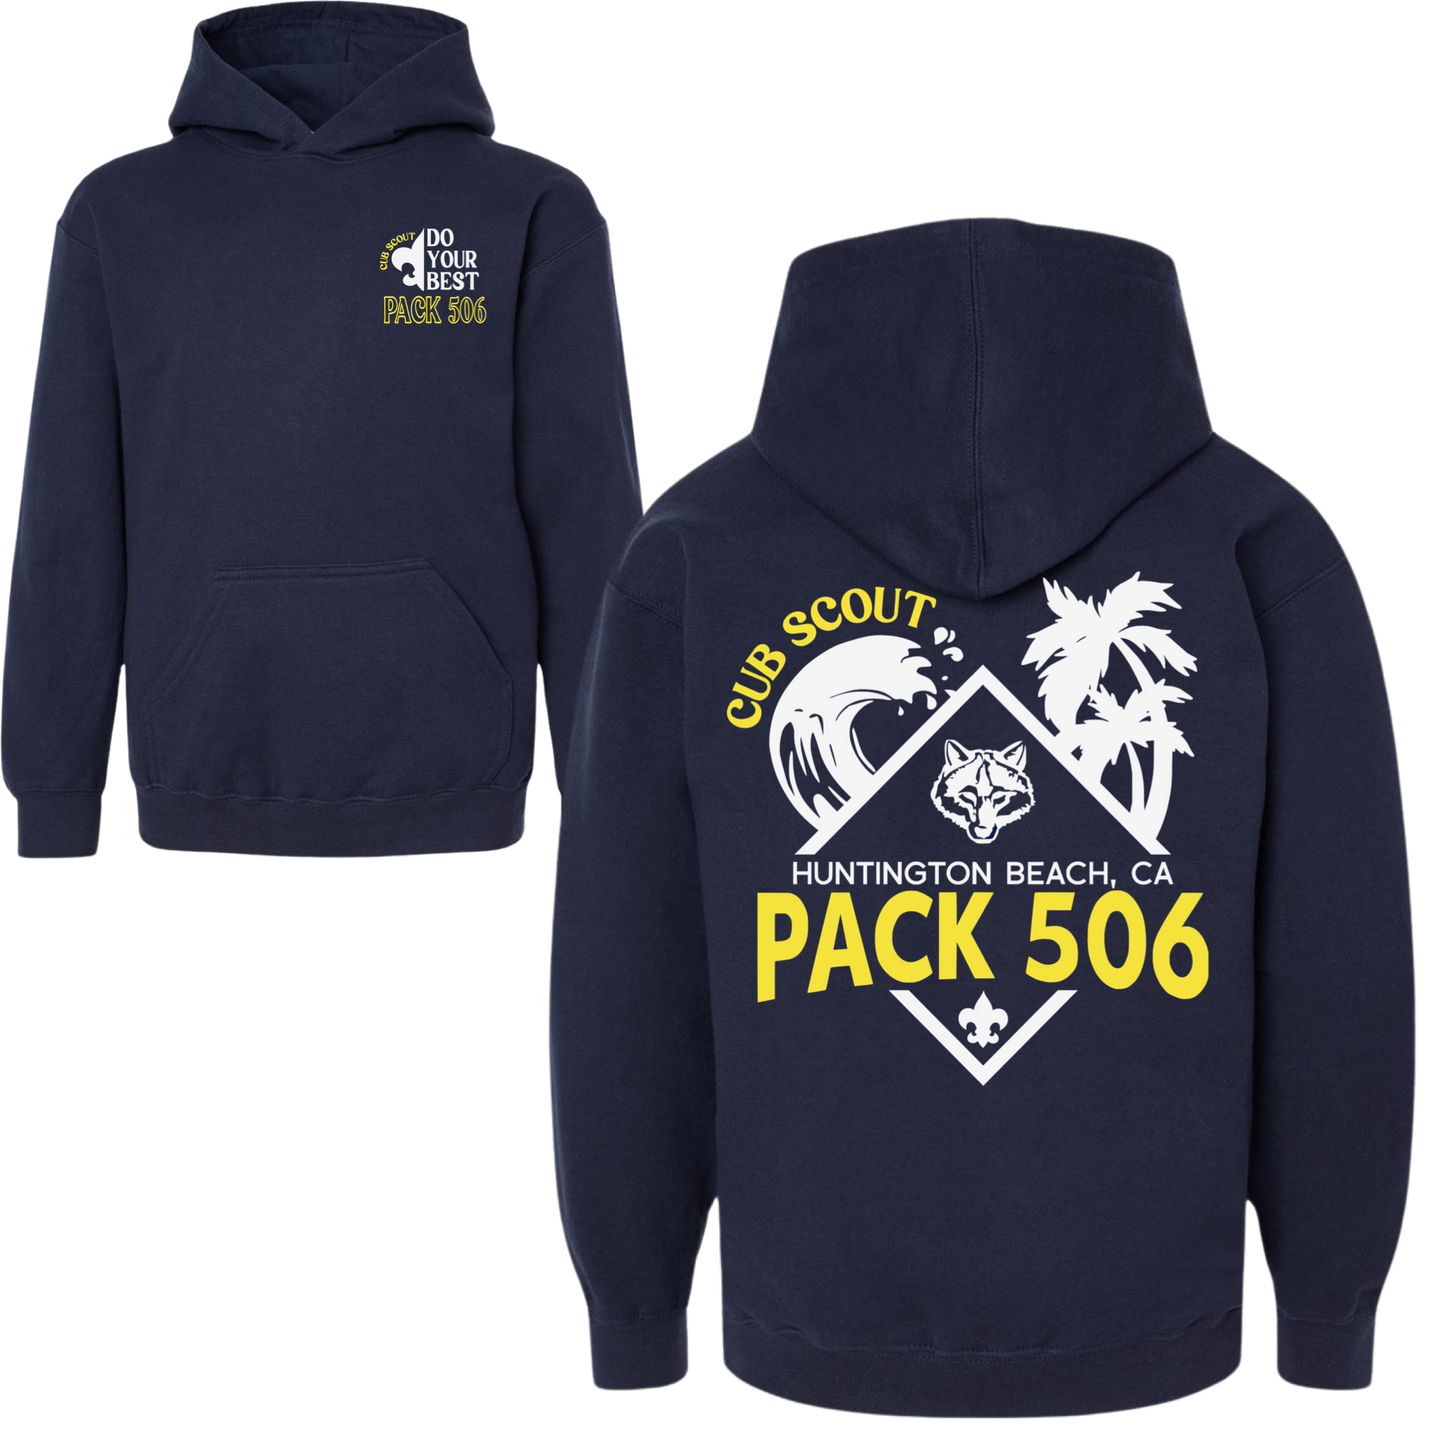 Pack 506 Navy Hooded Sweater